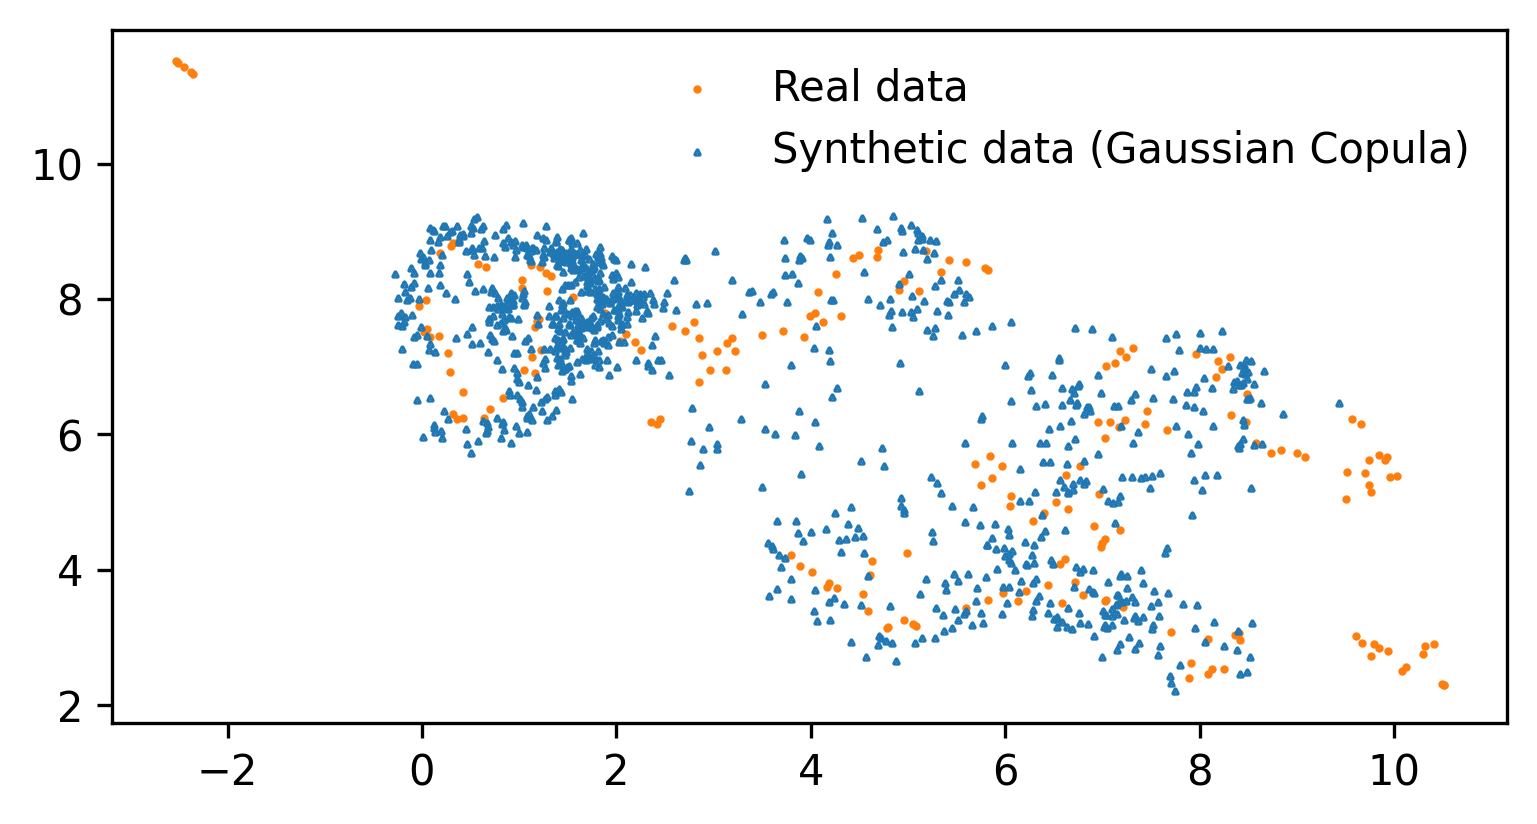 An evaluation framework for synthetic data generation models